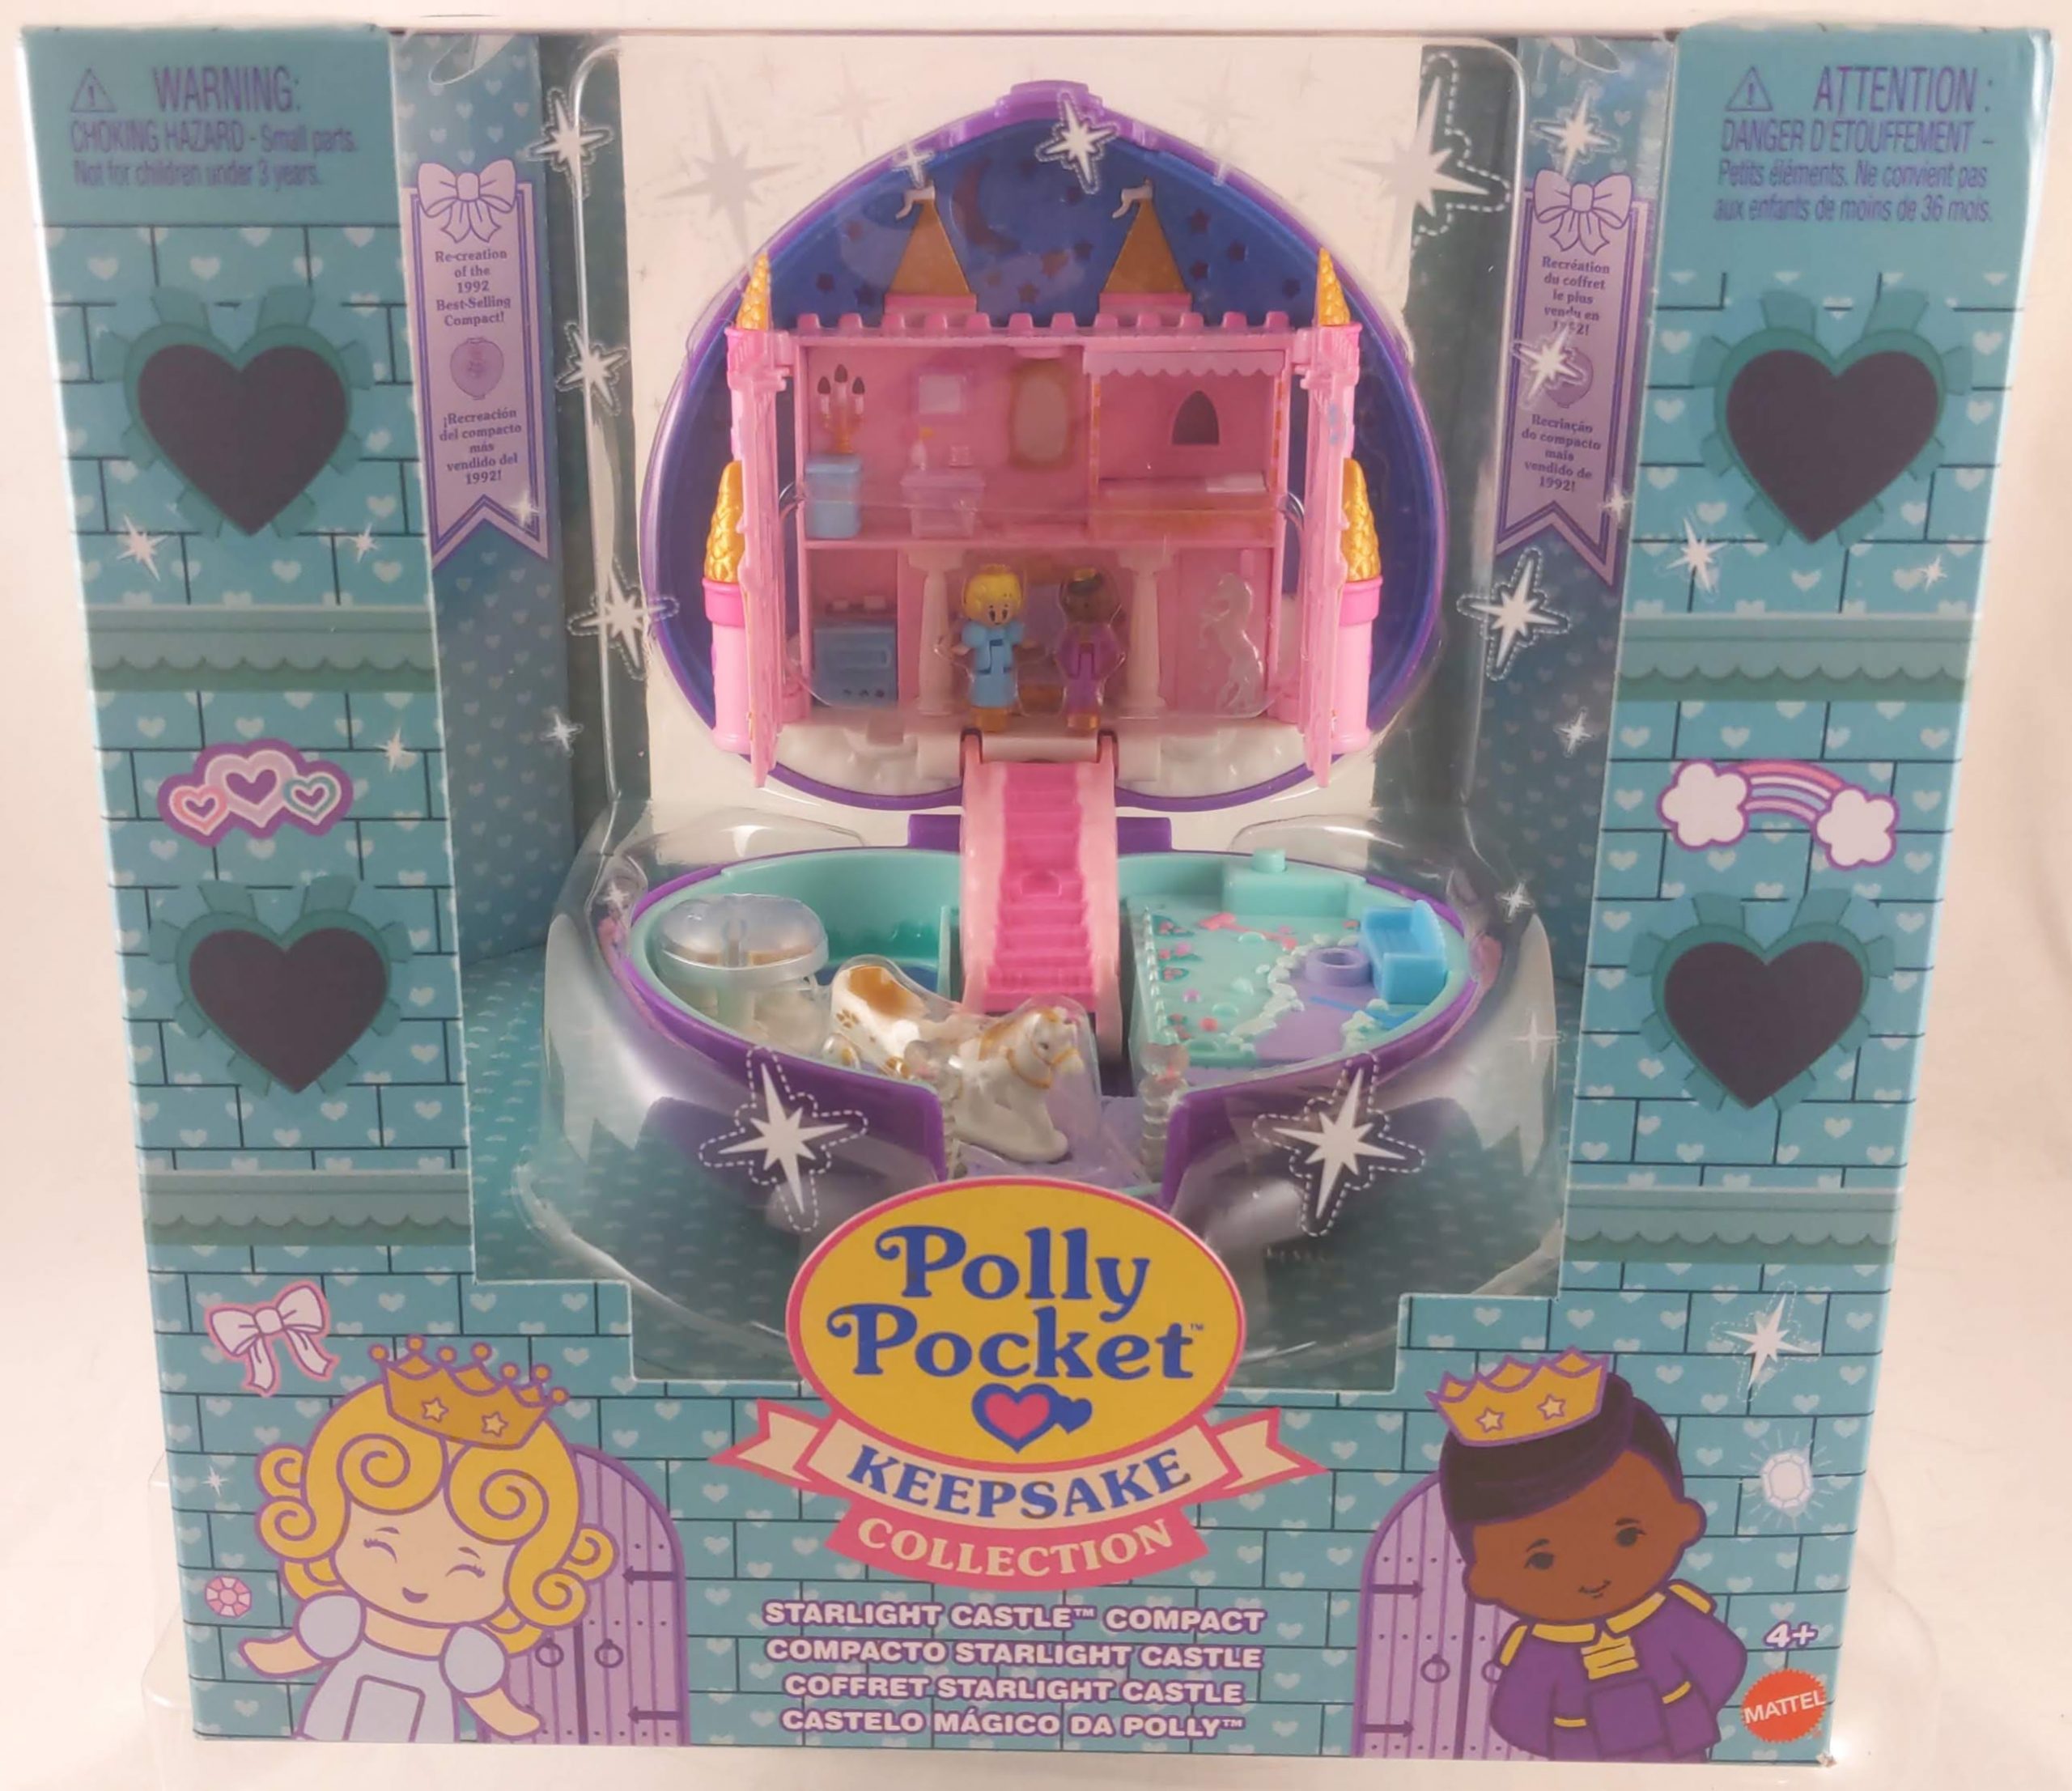 Polly Pocket Play Sets, Small Compacts, Mini Keychains, and